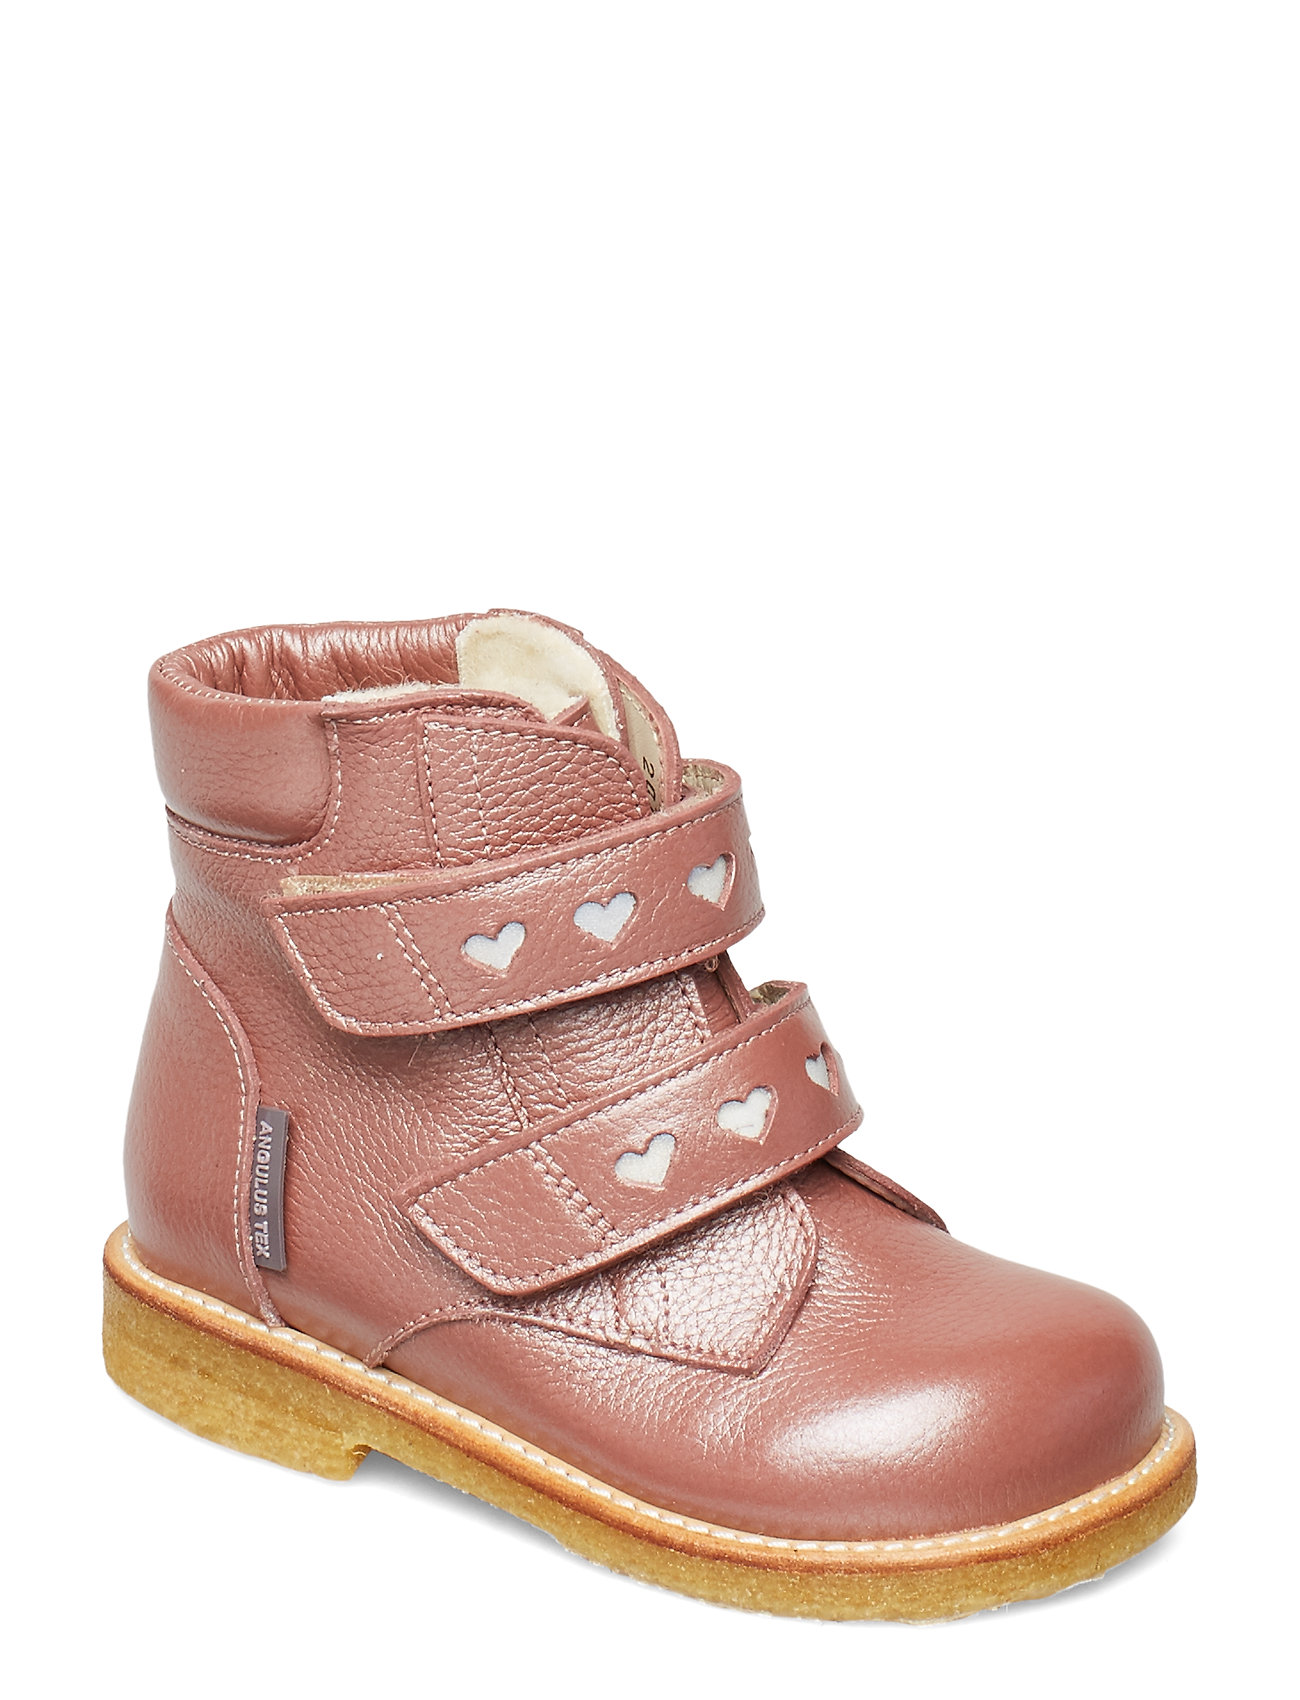 Boots - Flat - With Velcro Shoes Pre Walkers 18-25 Vaaleanpunainen ANGULUS